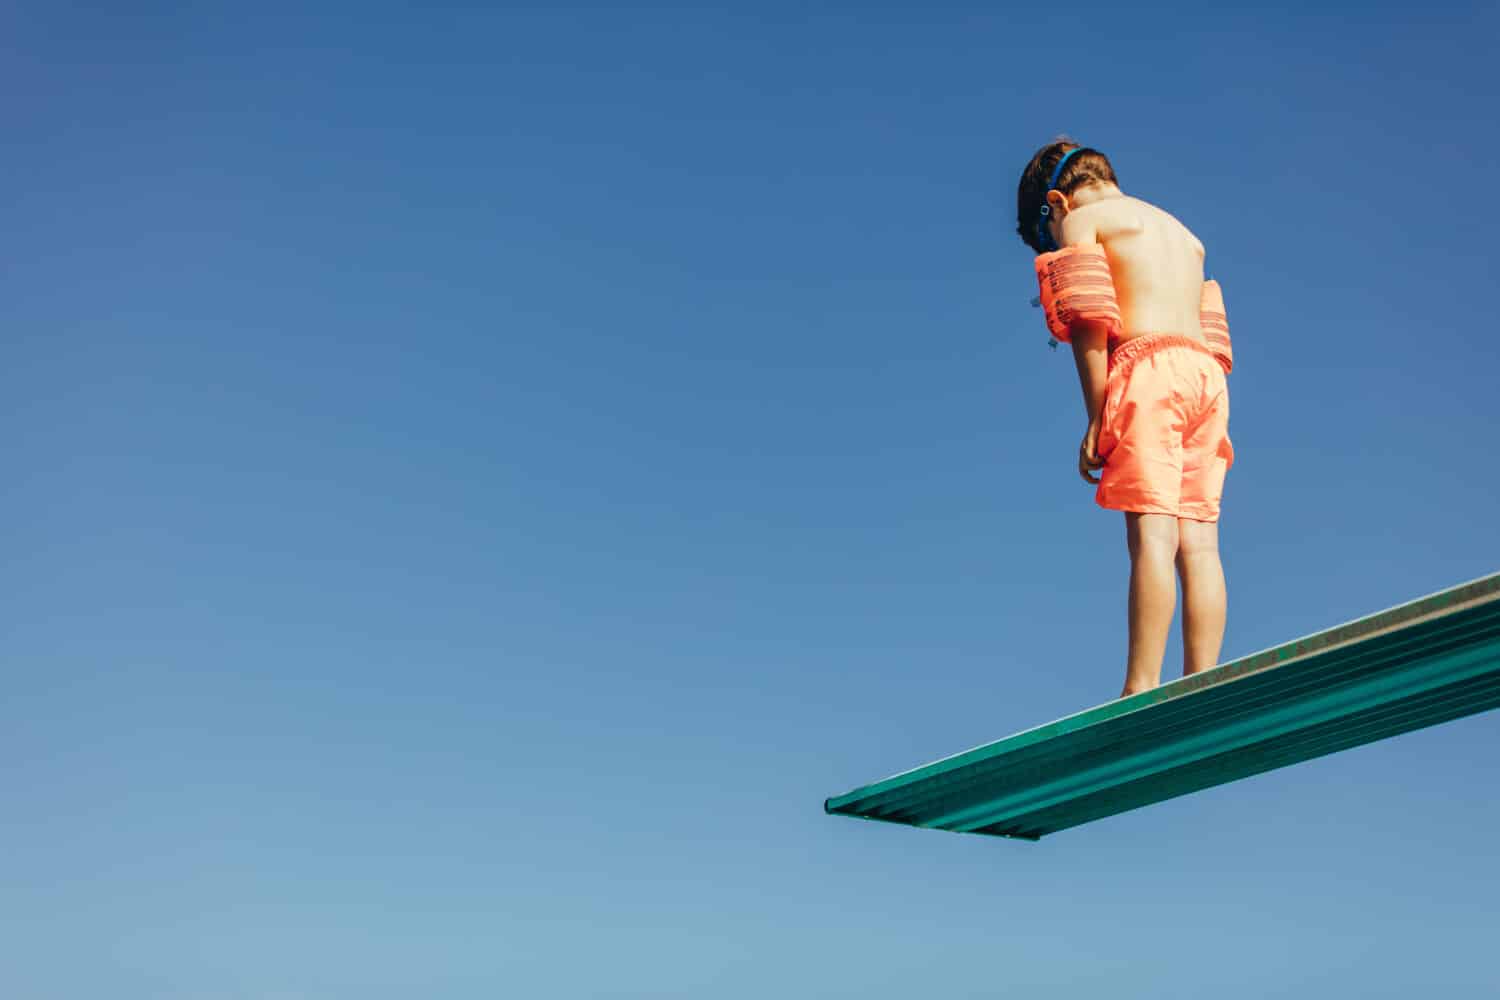 Low angle shot of boy with sleeves floats on diving board preparing for dive in the pool. Boy standing on diving spring board against sky.